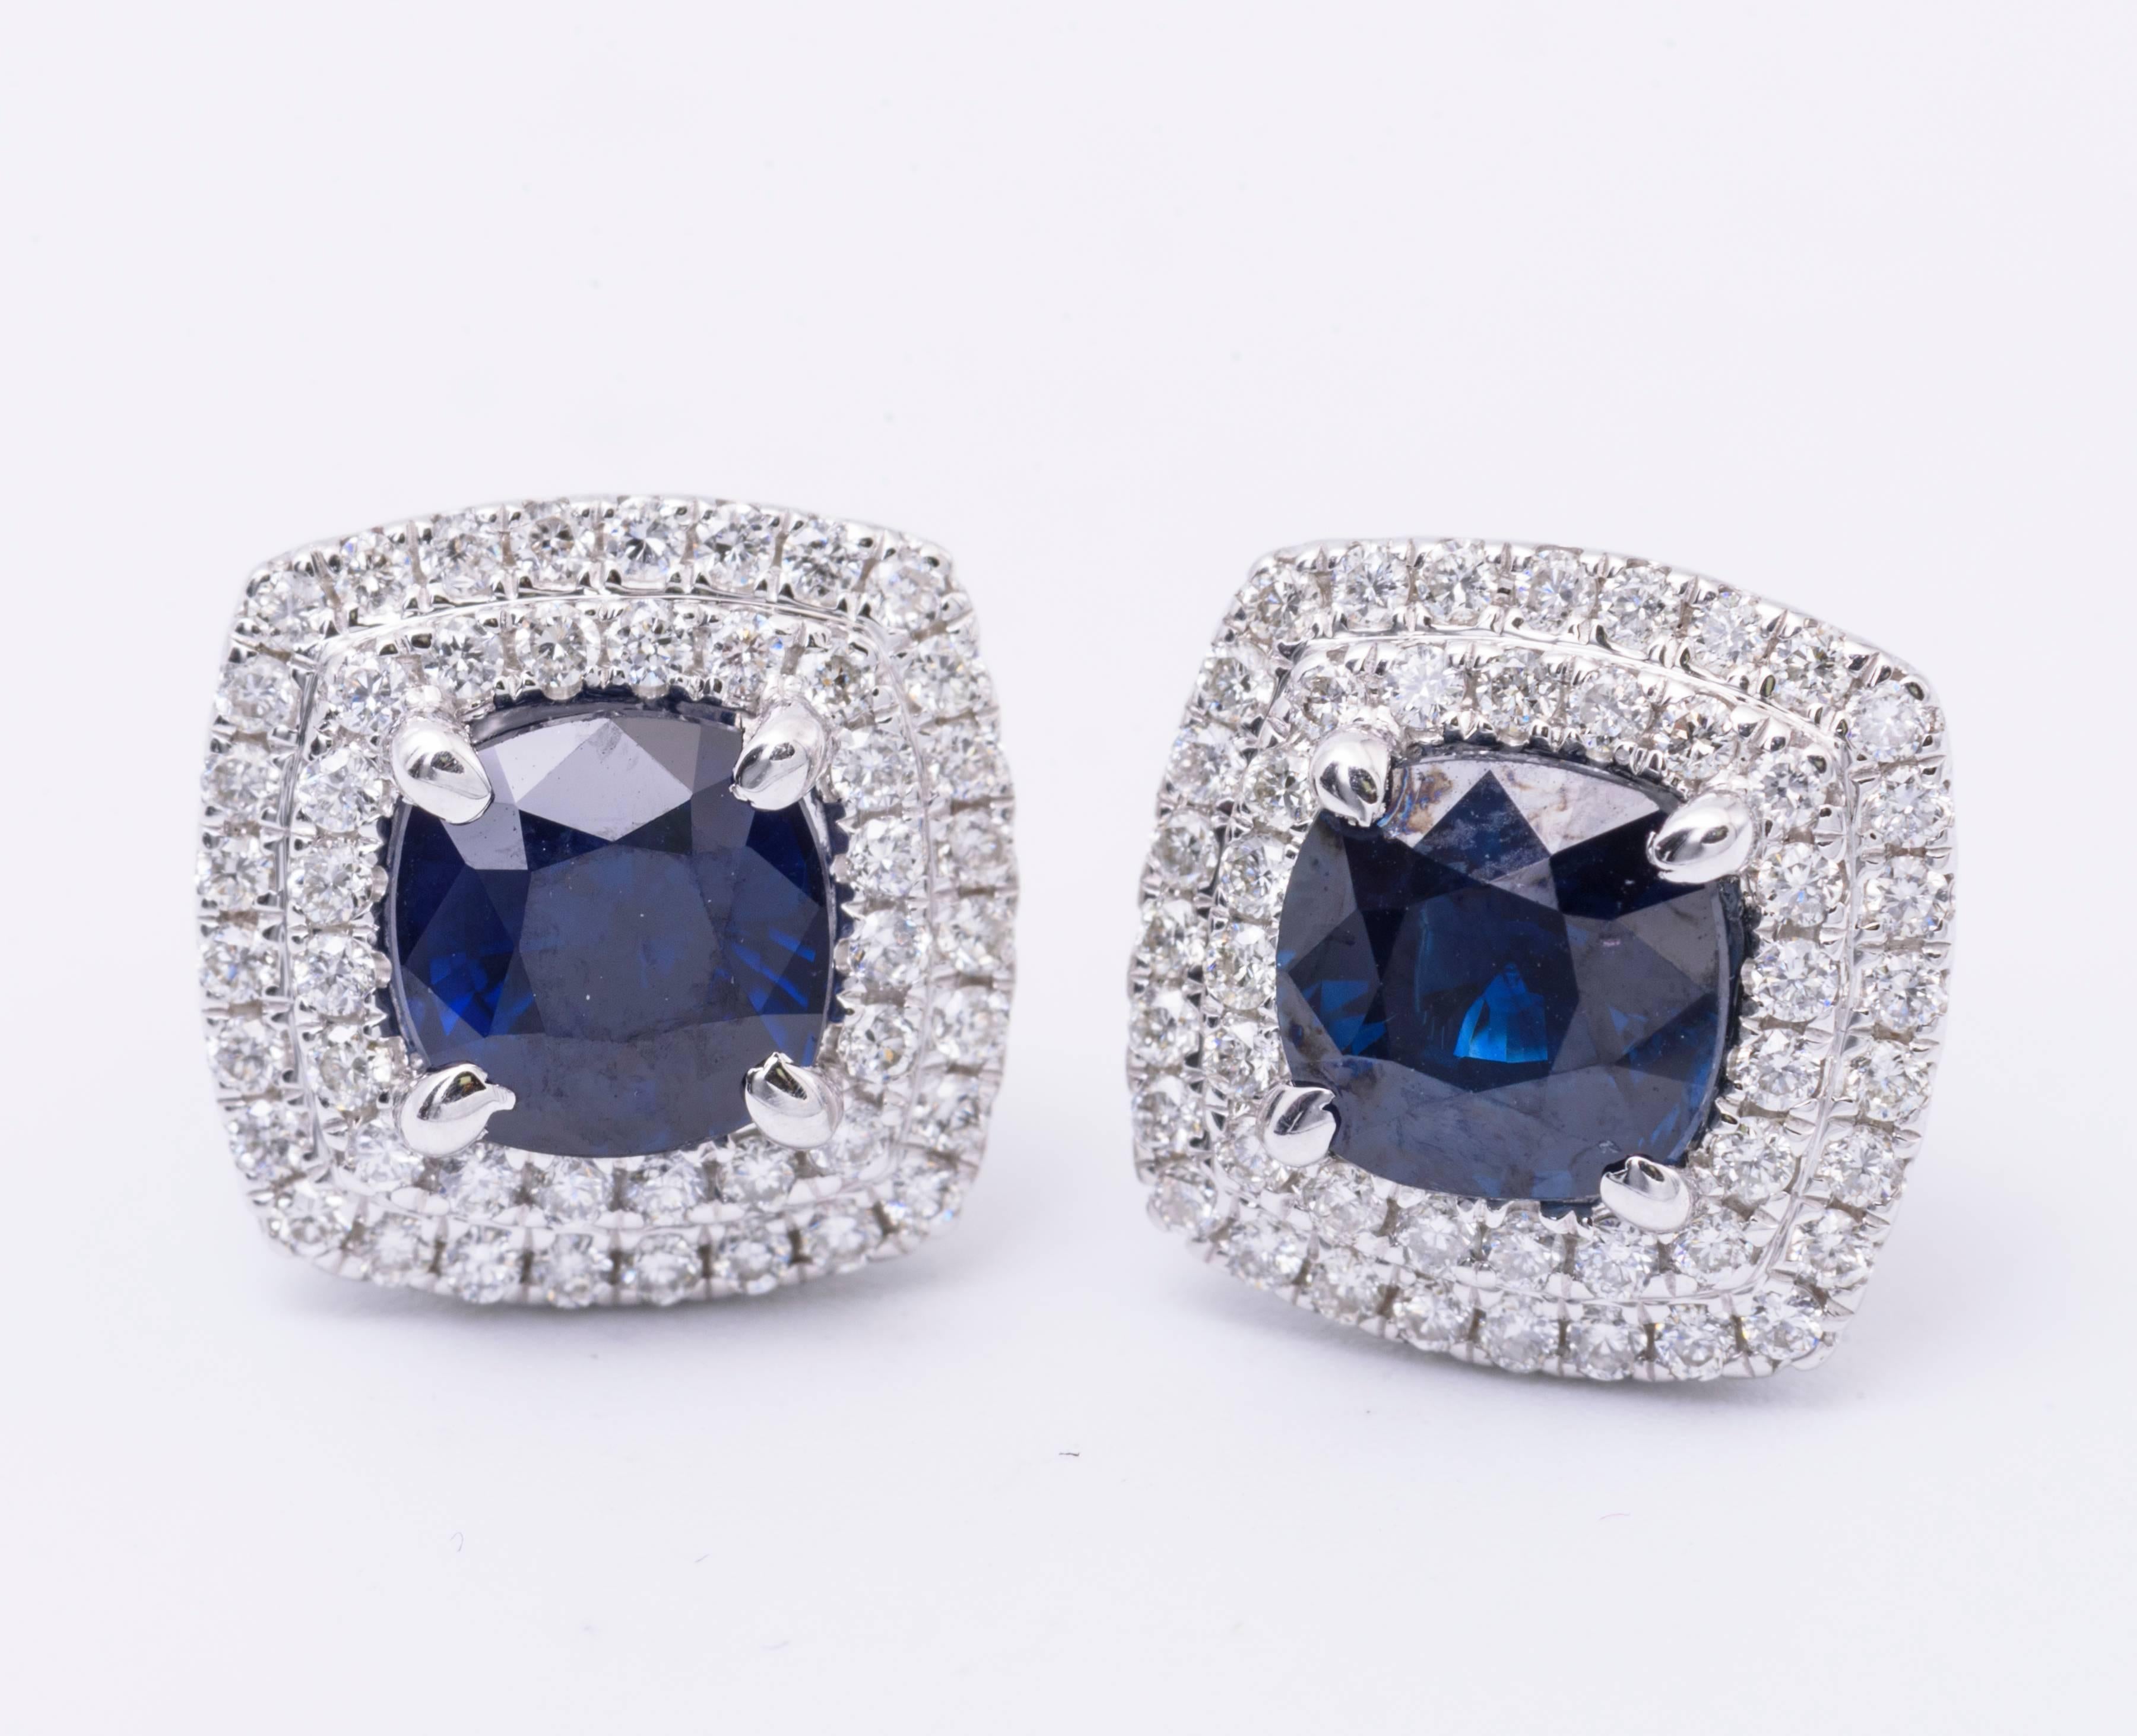 This stunning pair of sapphire earrings features:
Sapphire:  2.29 Carats total weight 6 mm
Diamonds: 0.55 Carats Diamonds
11 x 11 mm Earring Measurment
